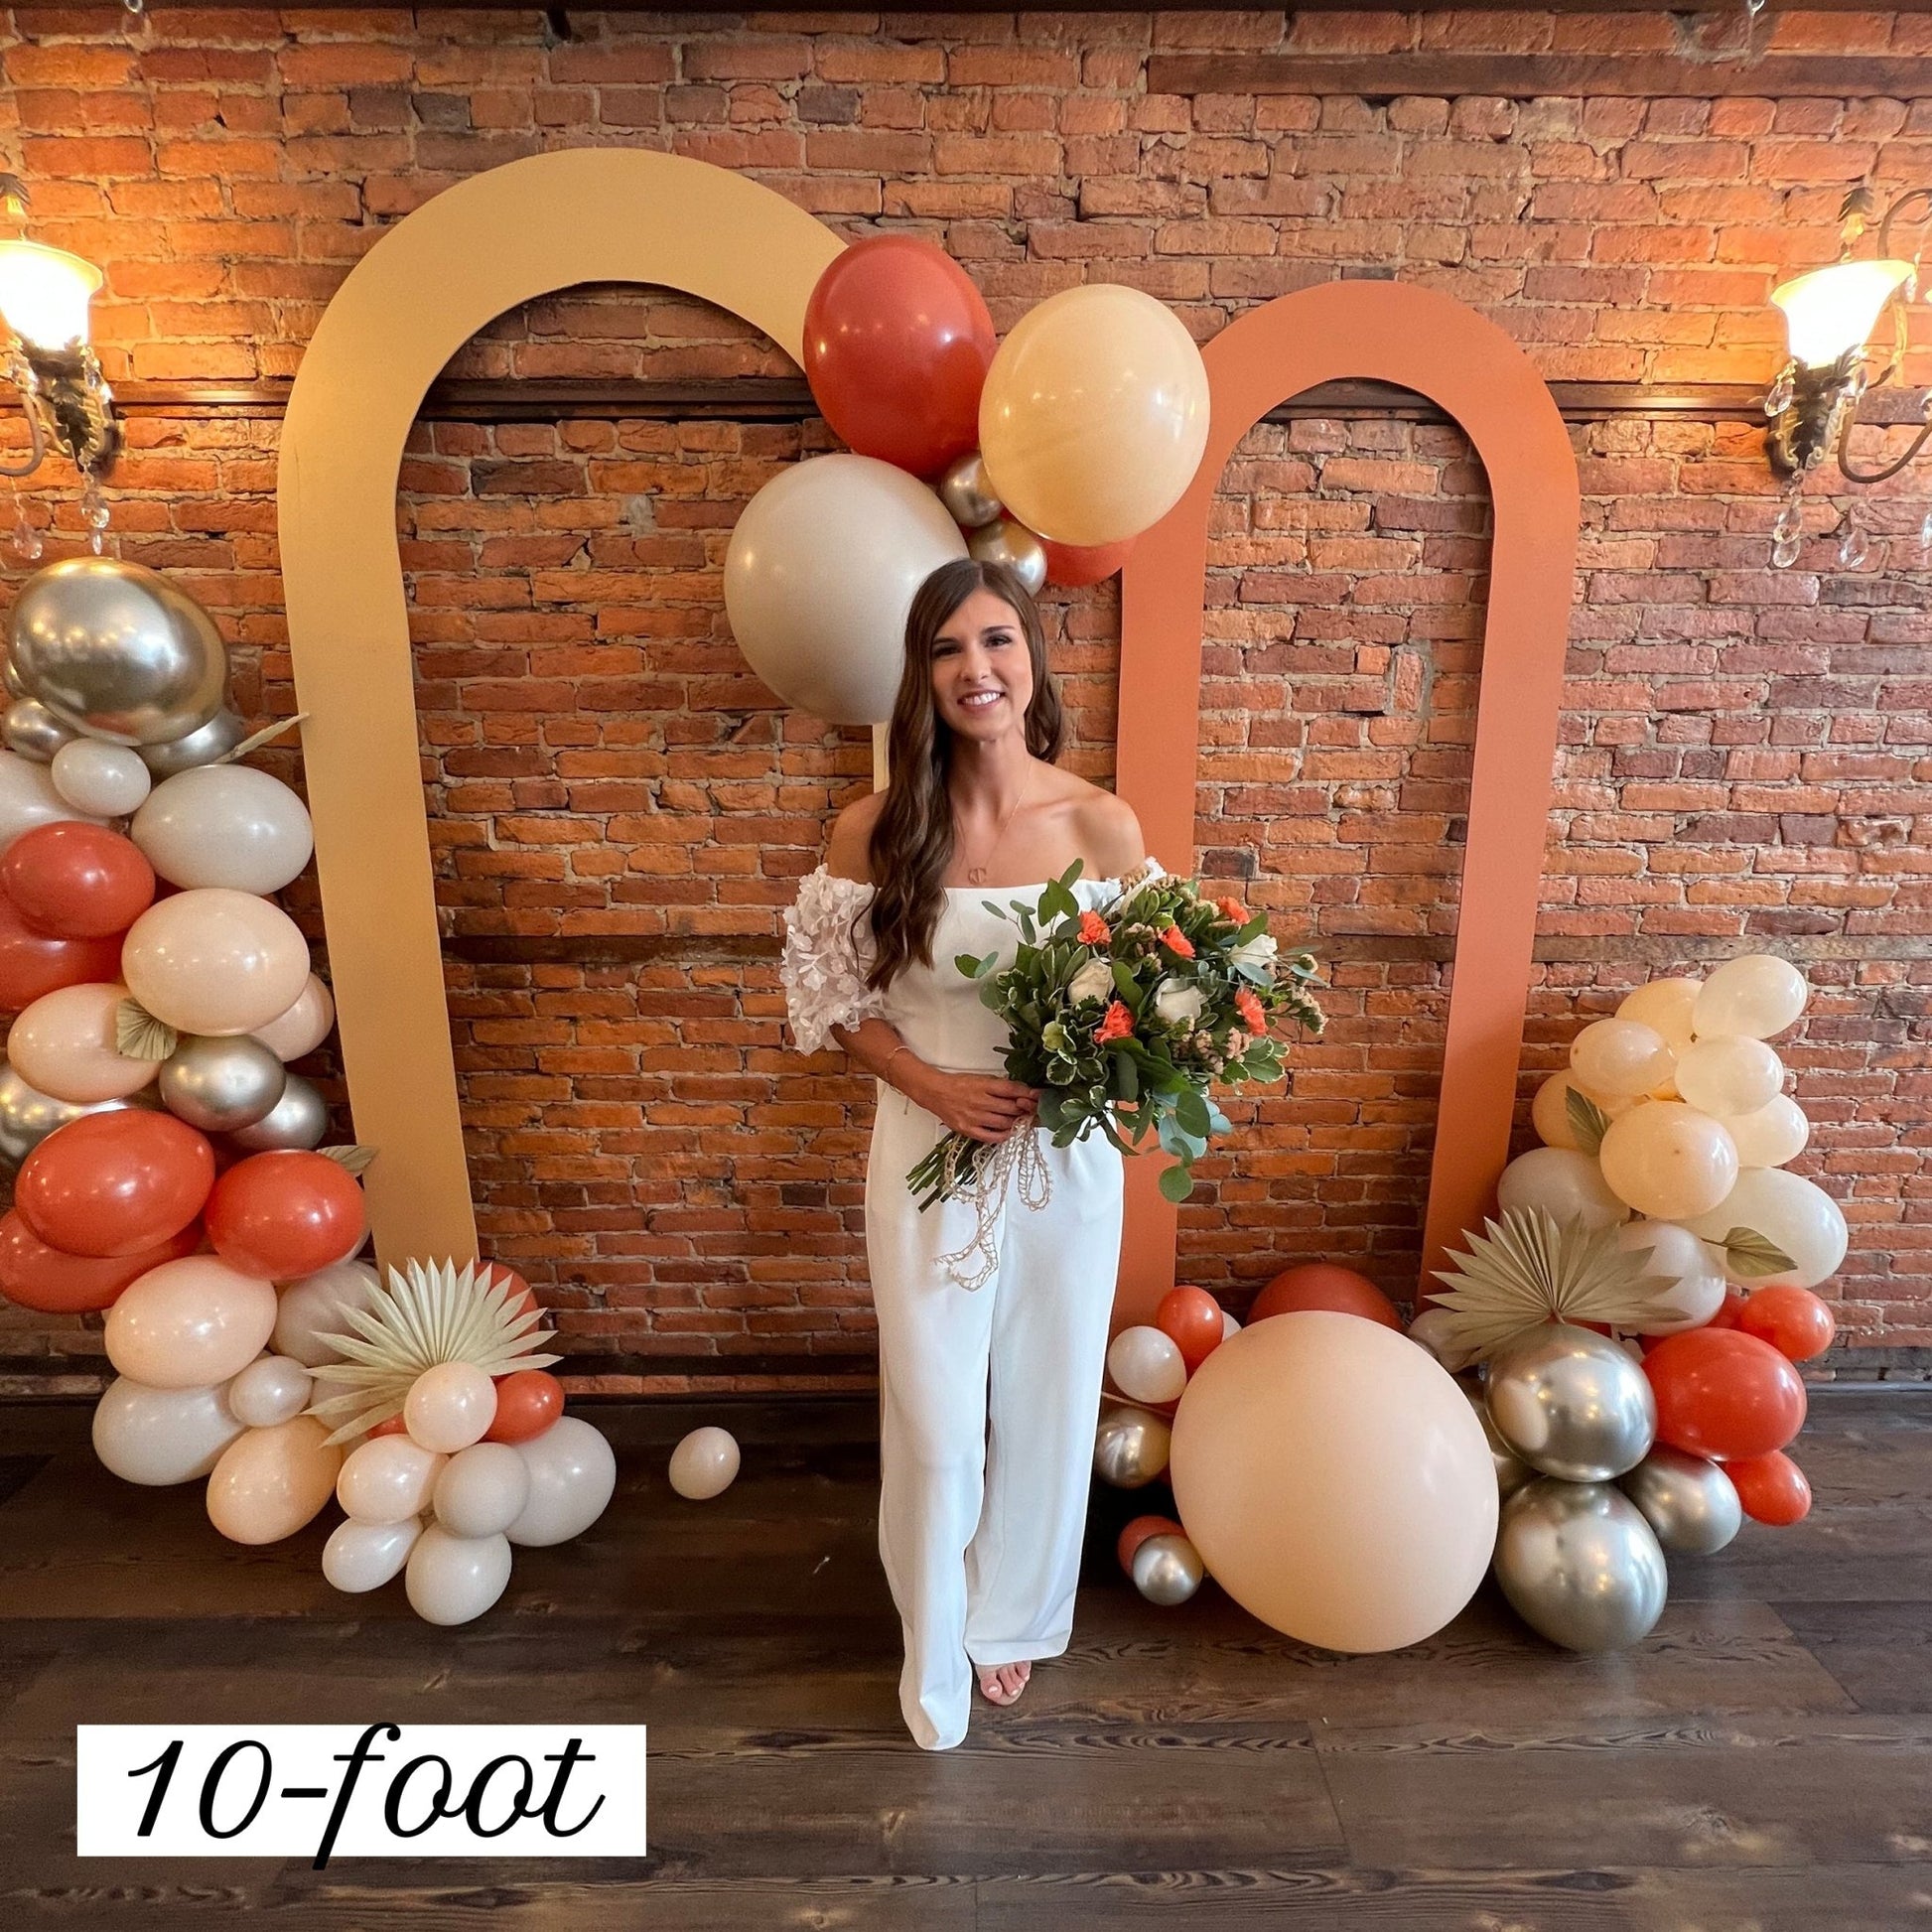 Boho Rustic Balloon Arch Kit - Burnt Orange and Gold Balloon Garland Kit - Ellie's Party Supply